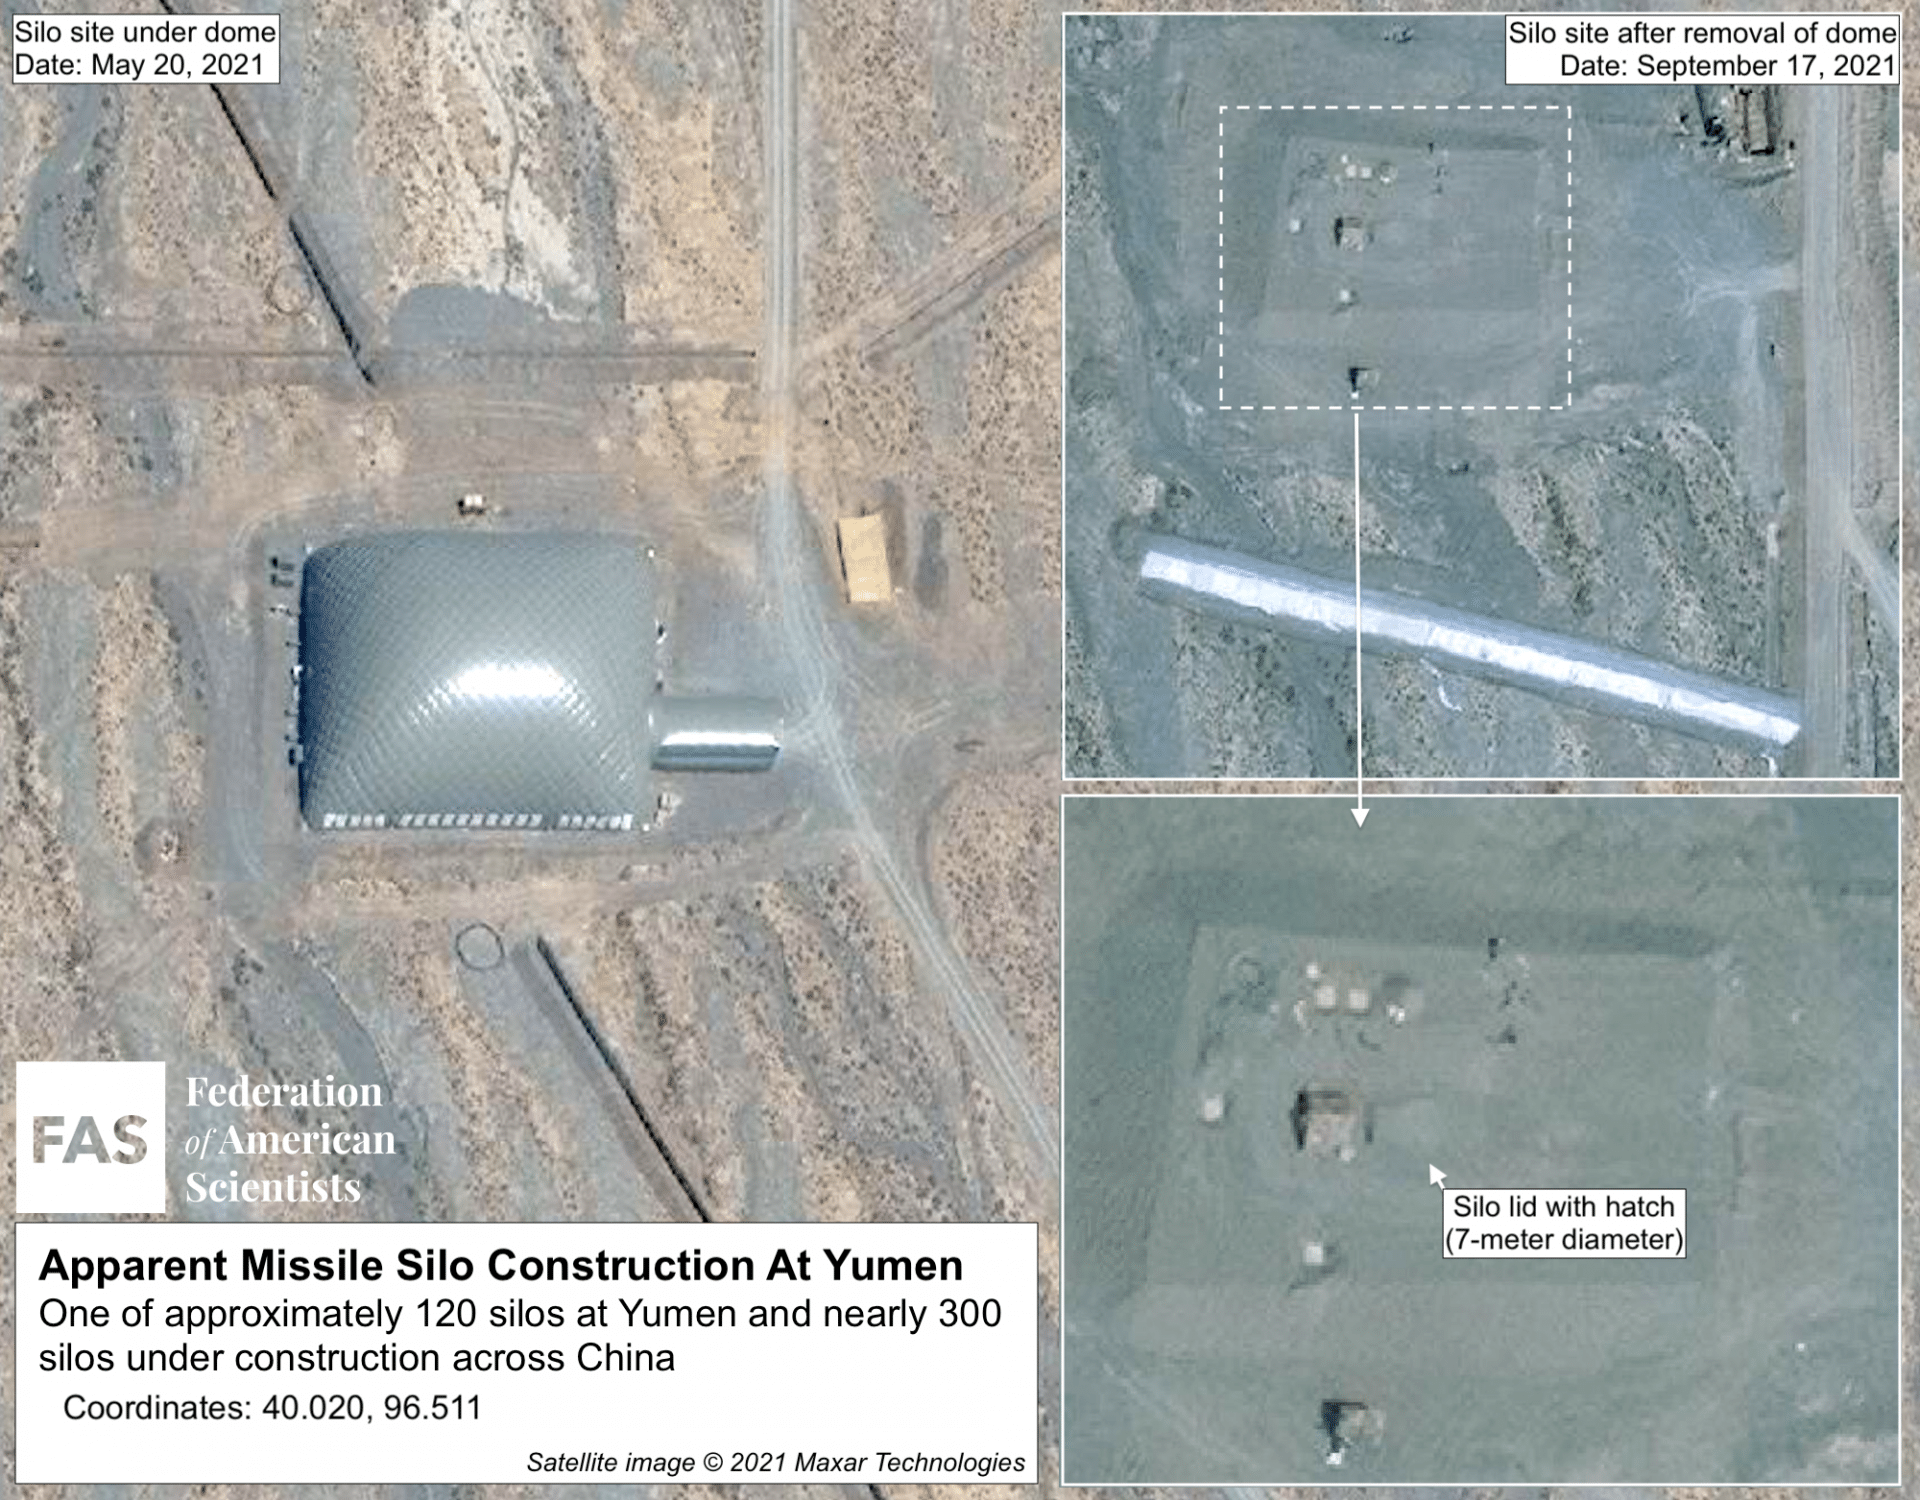 Satellite images show clear features of silo construction near Yumen in central China. Satellite photo source: Maxar Technologies.